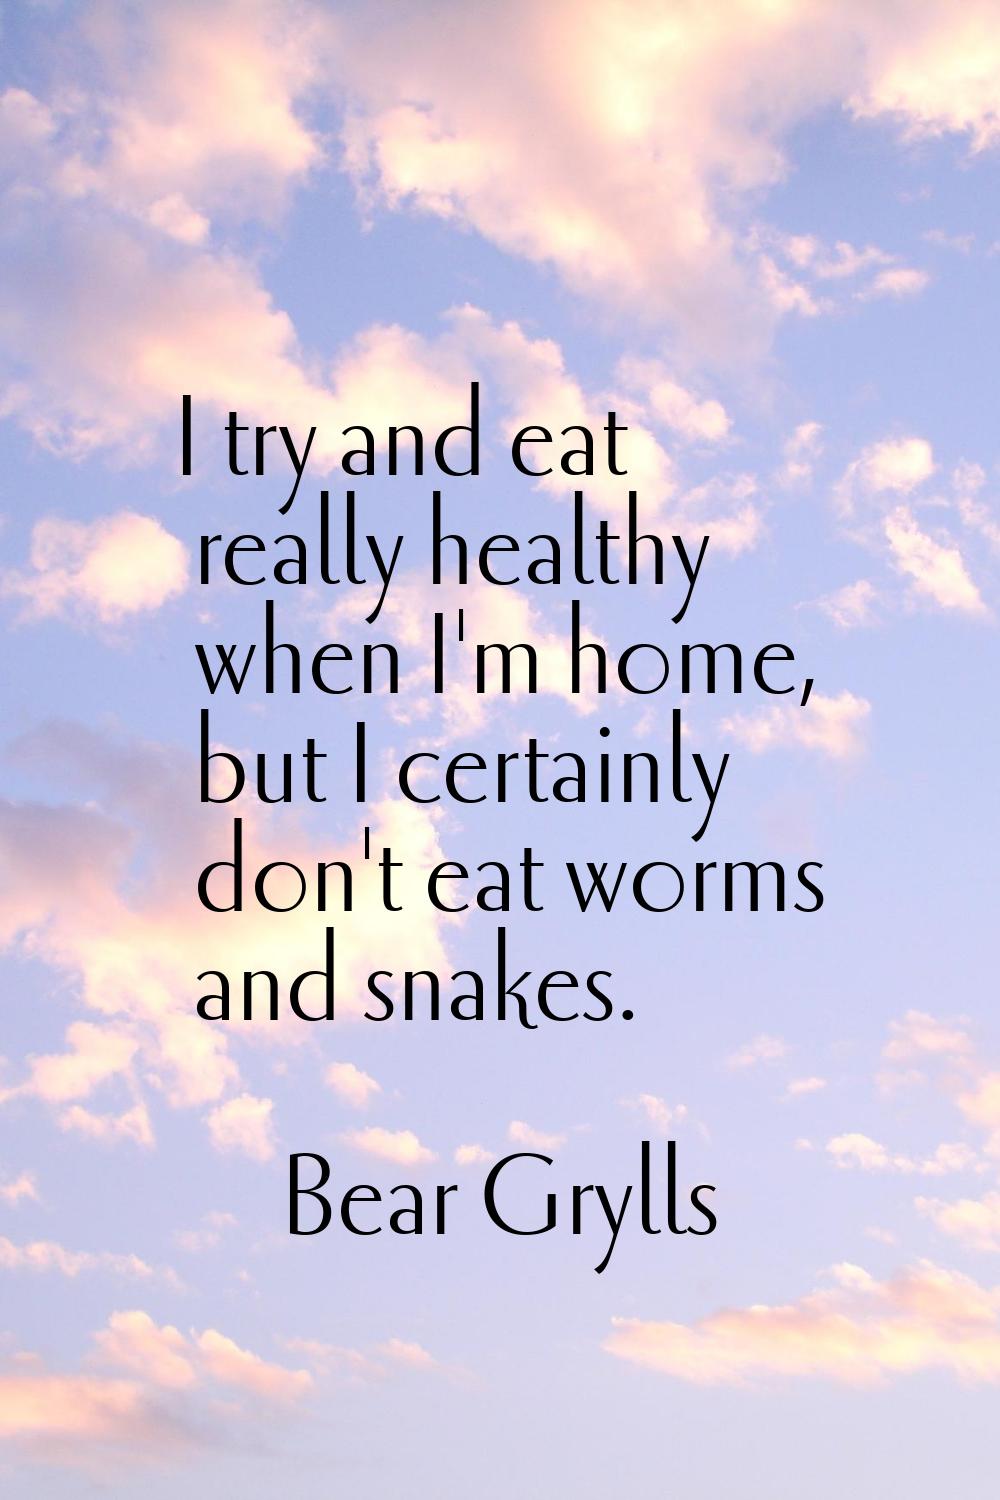 I try and eat really healthy when I'm home, but I certainly don't eat worms and snakes.